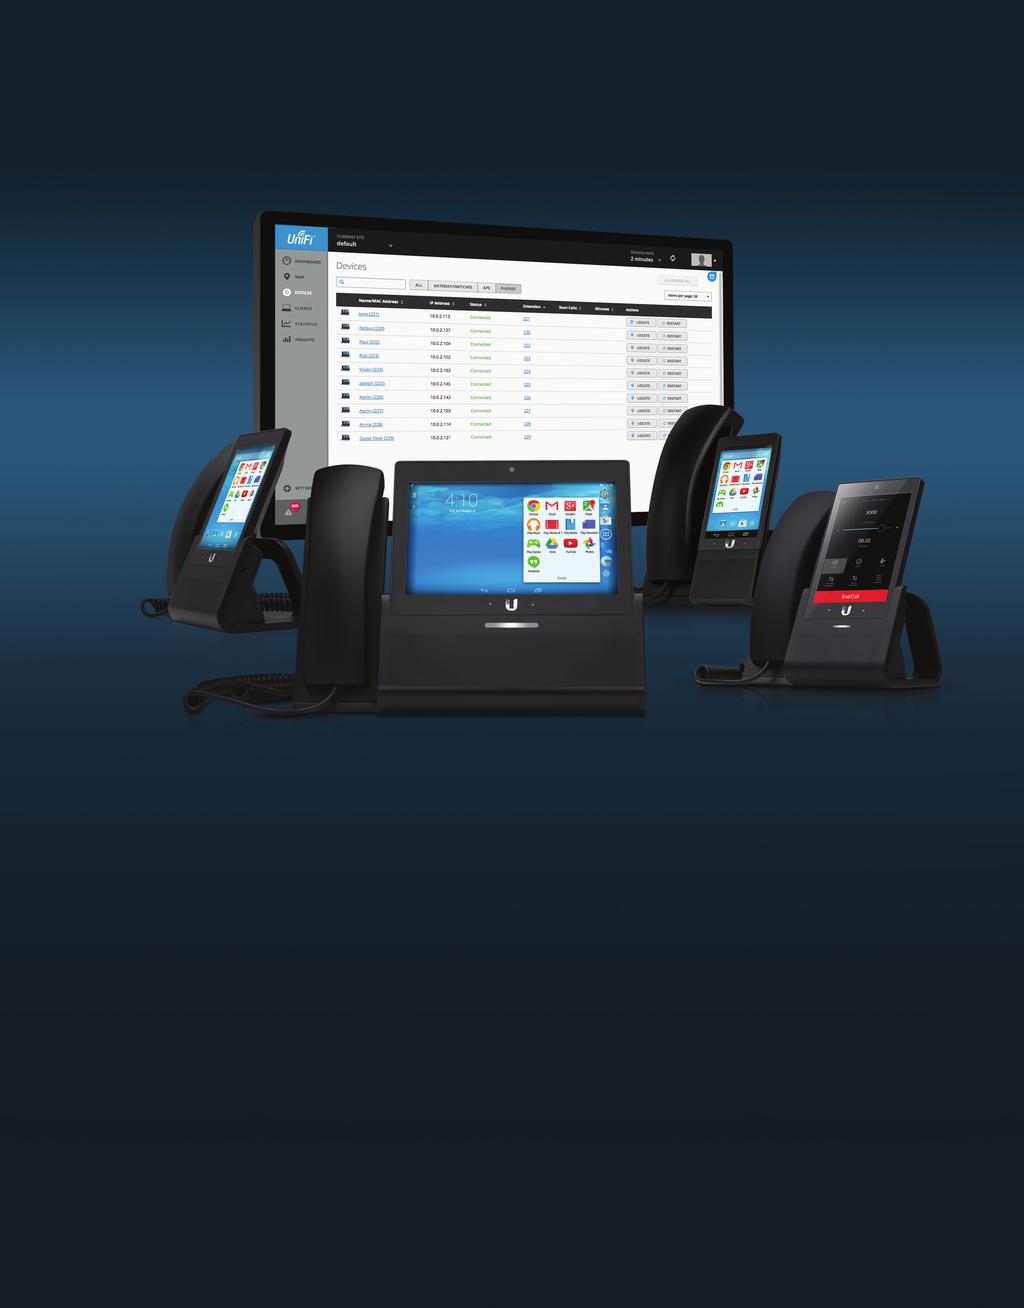 Enterprise VoIP Phone with Touchscreen Models: UVP-X, UVP, UVP-Pro, UVP-Executive